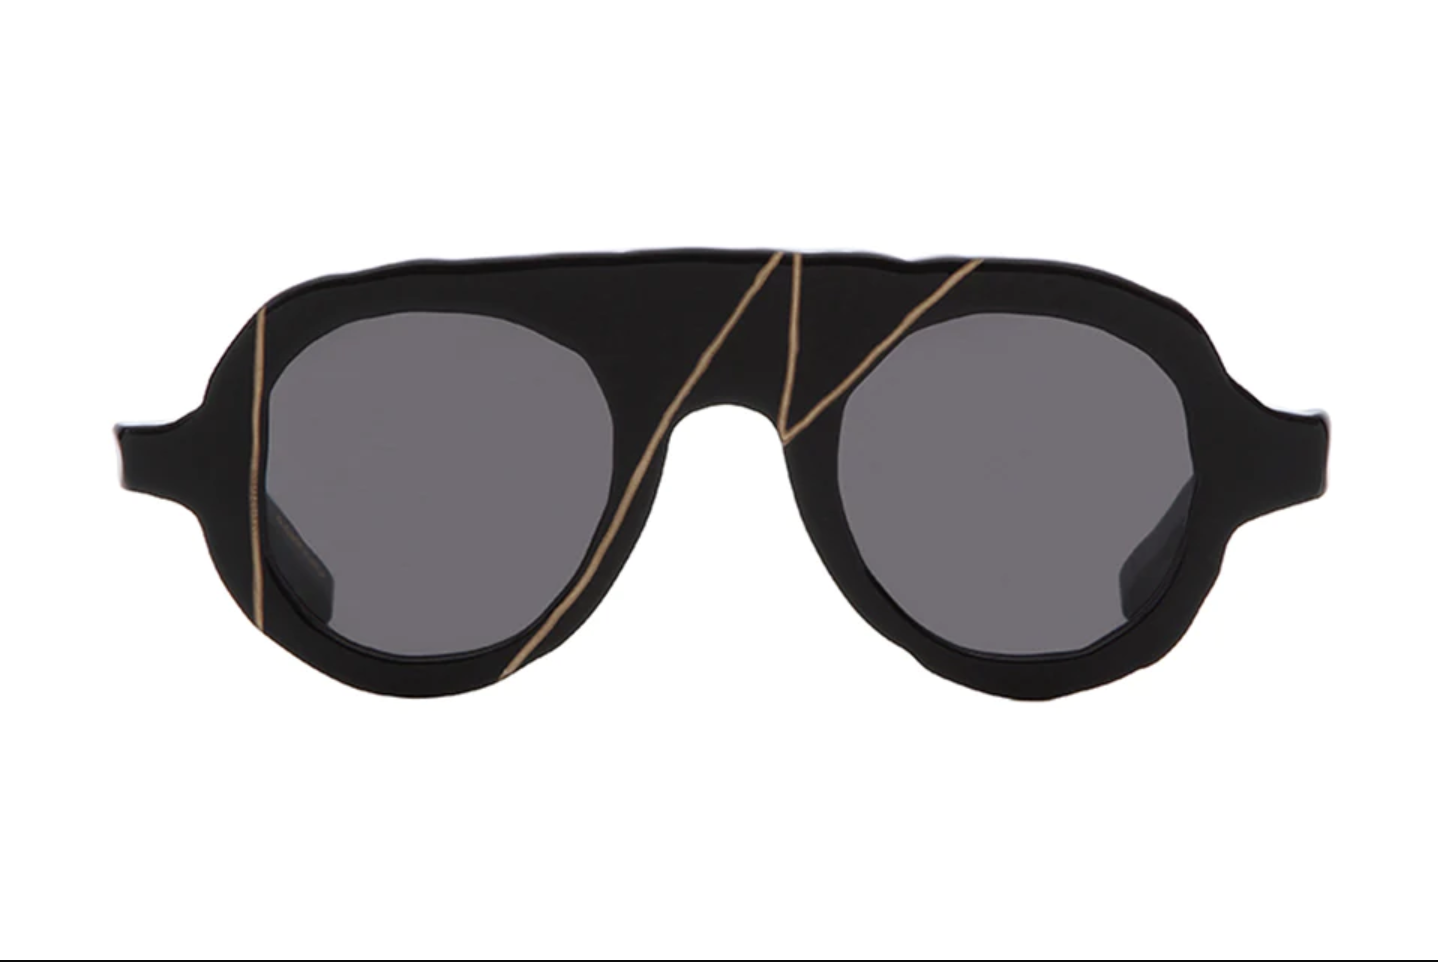 atelier optical featuring eyewear, fine boutique sunglasses, and mira-MM-0078 handcrafted goods